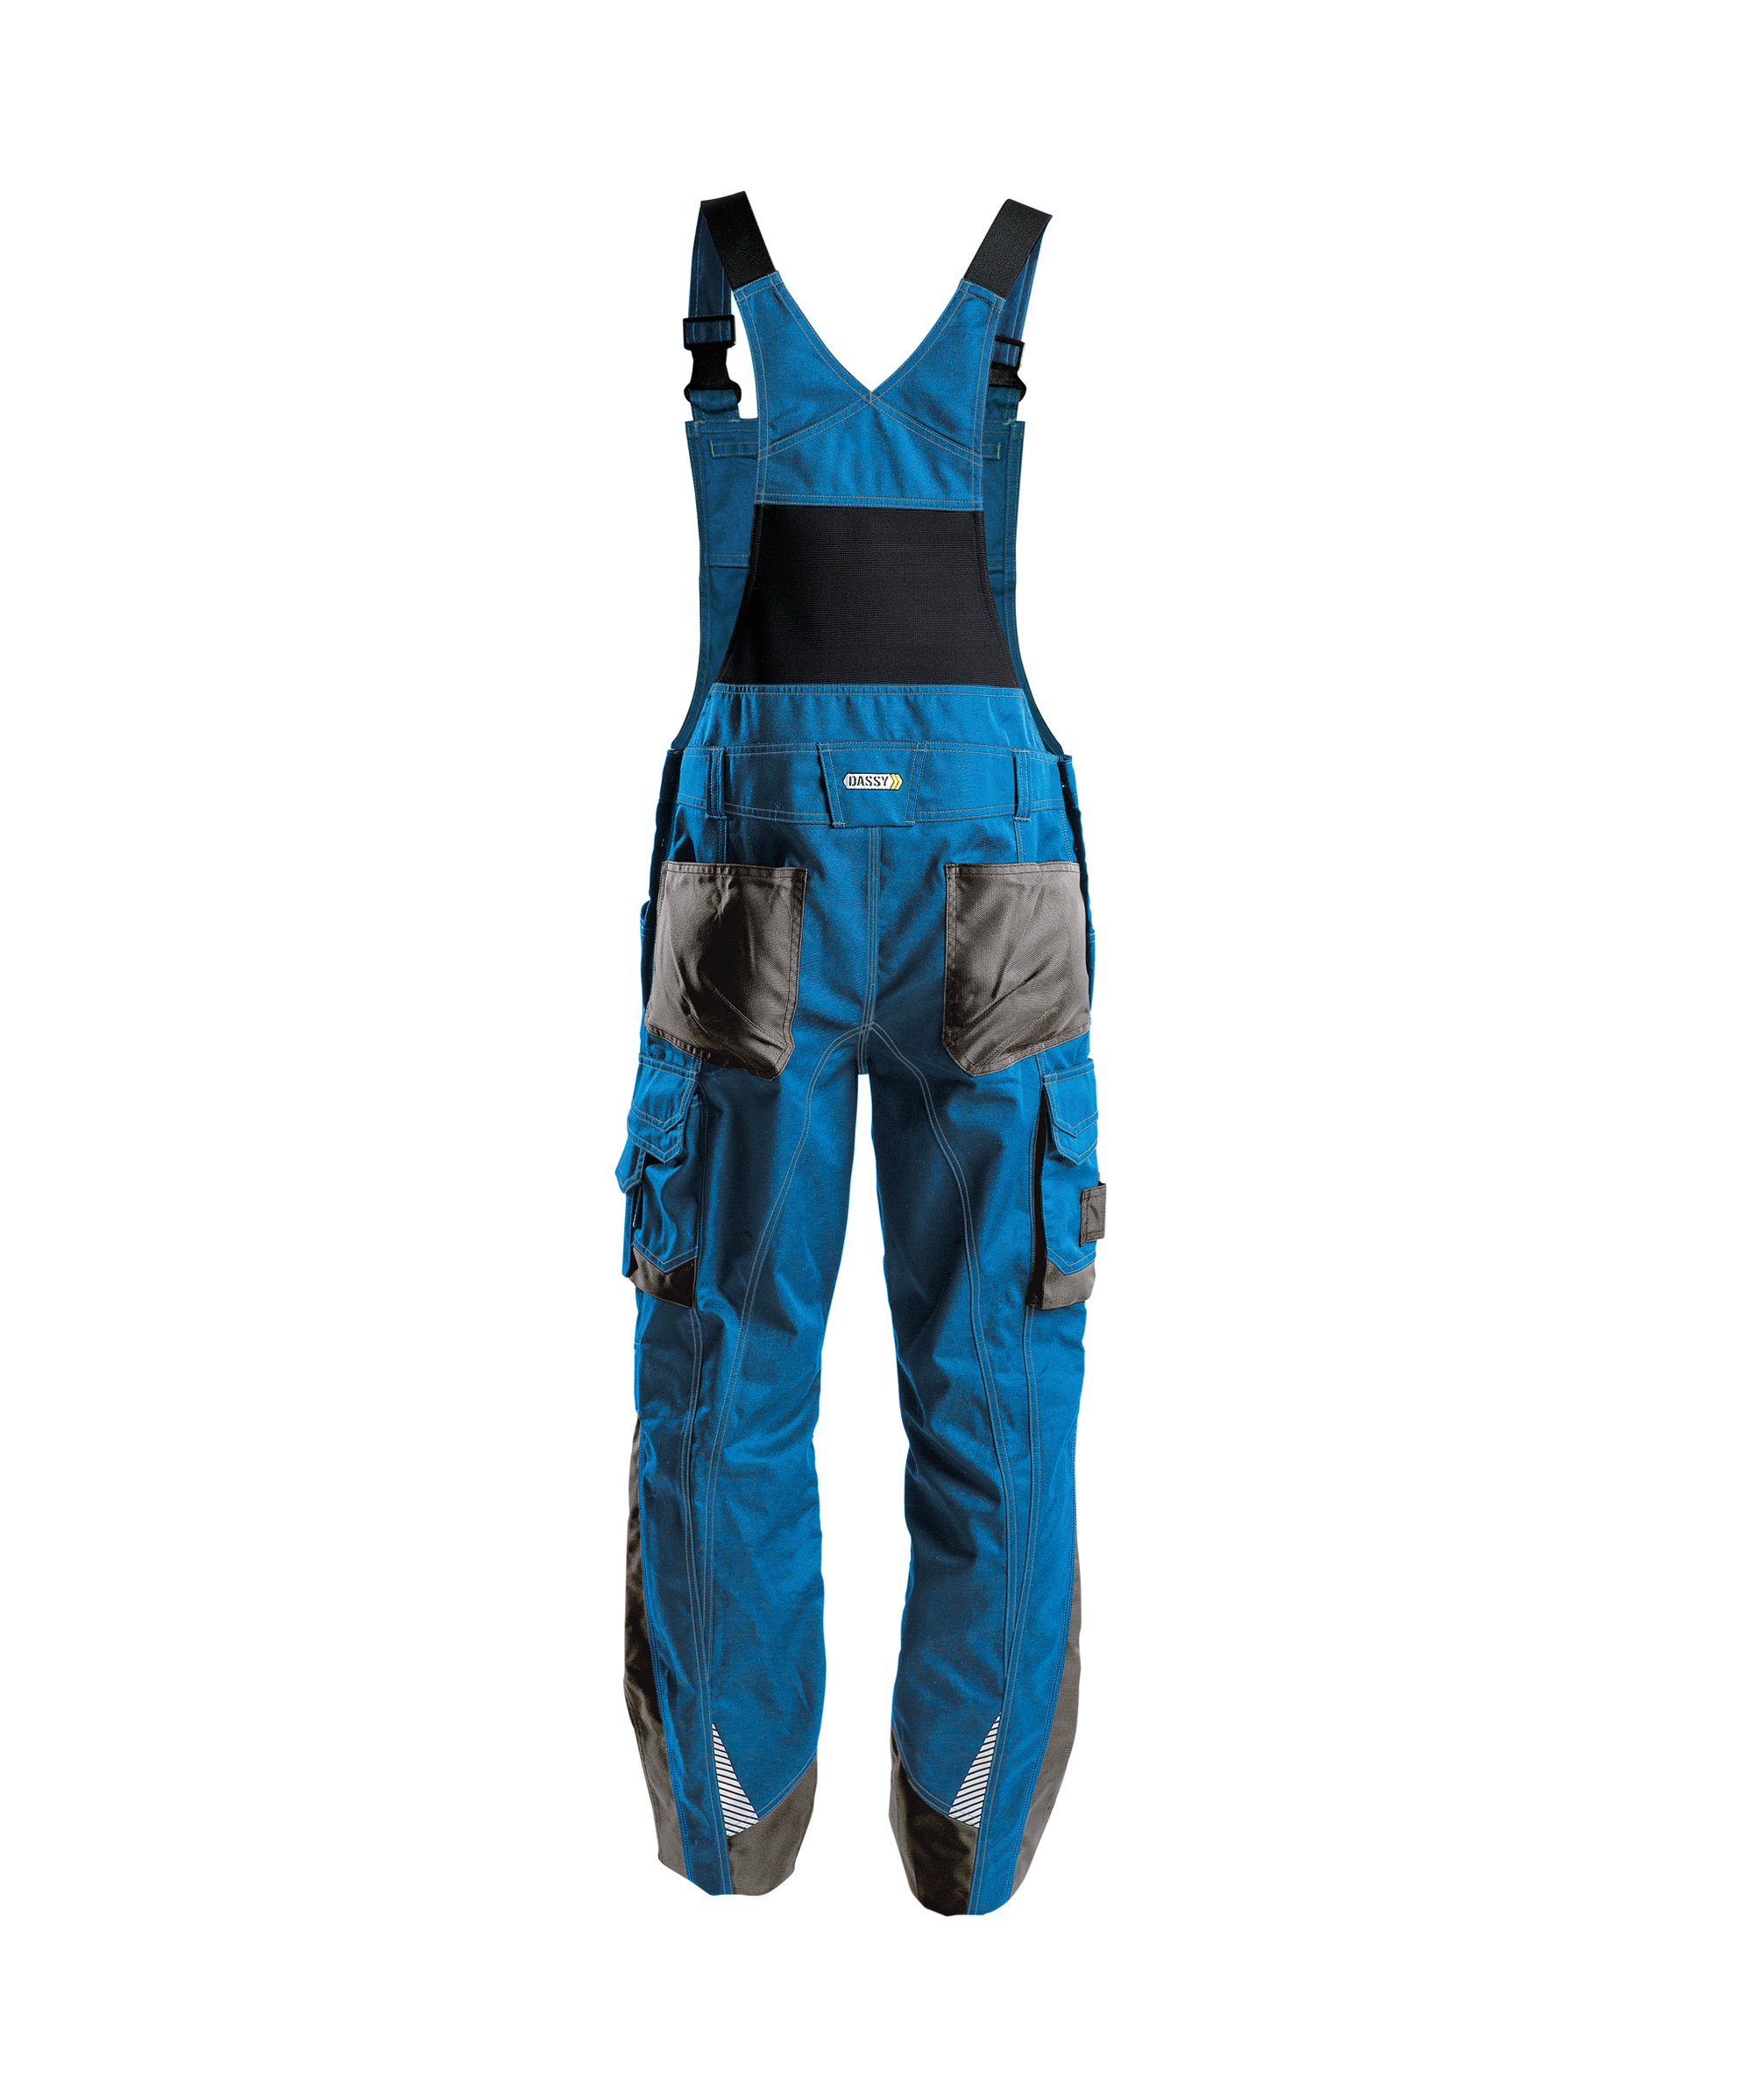 voltic_two-tone-brace-overall-with-knee-pockets_azure-blue-anthracite-grey_back.jpg